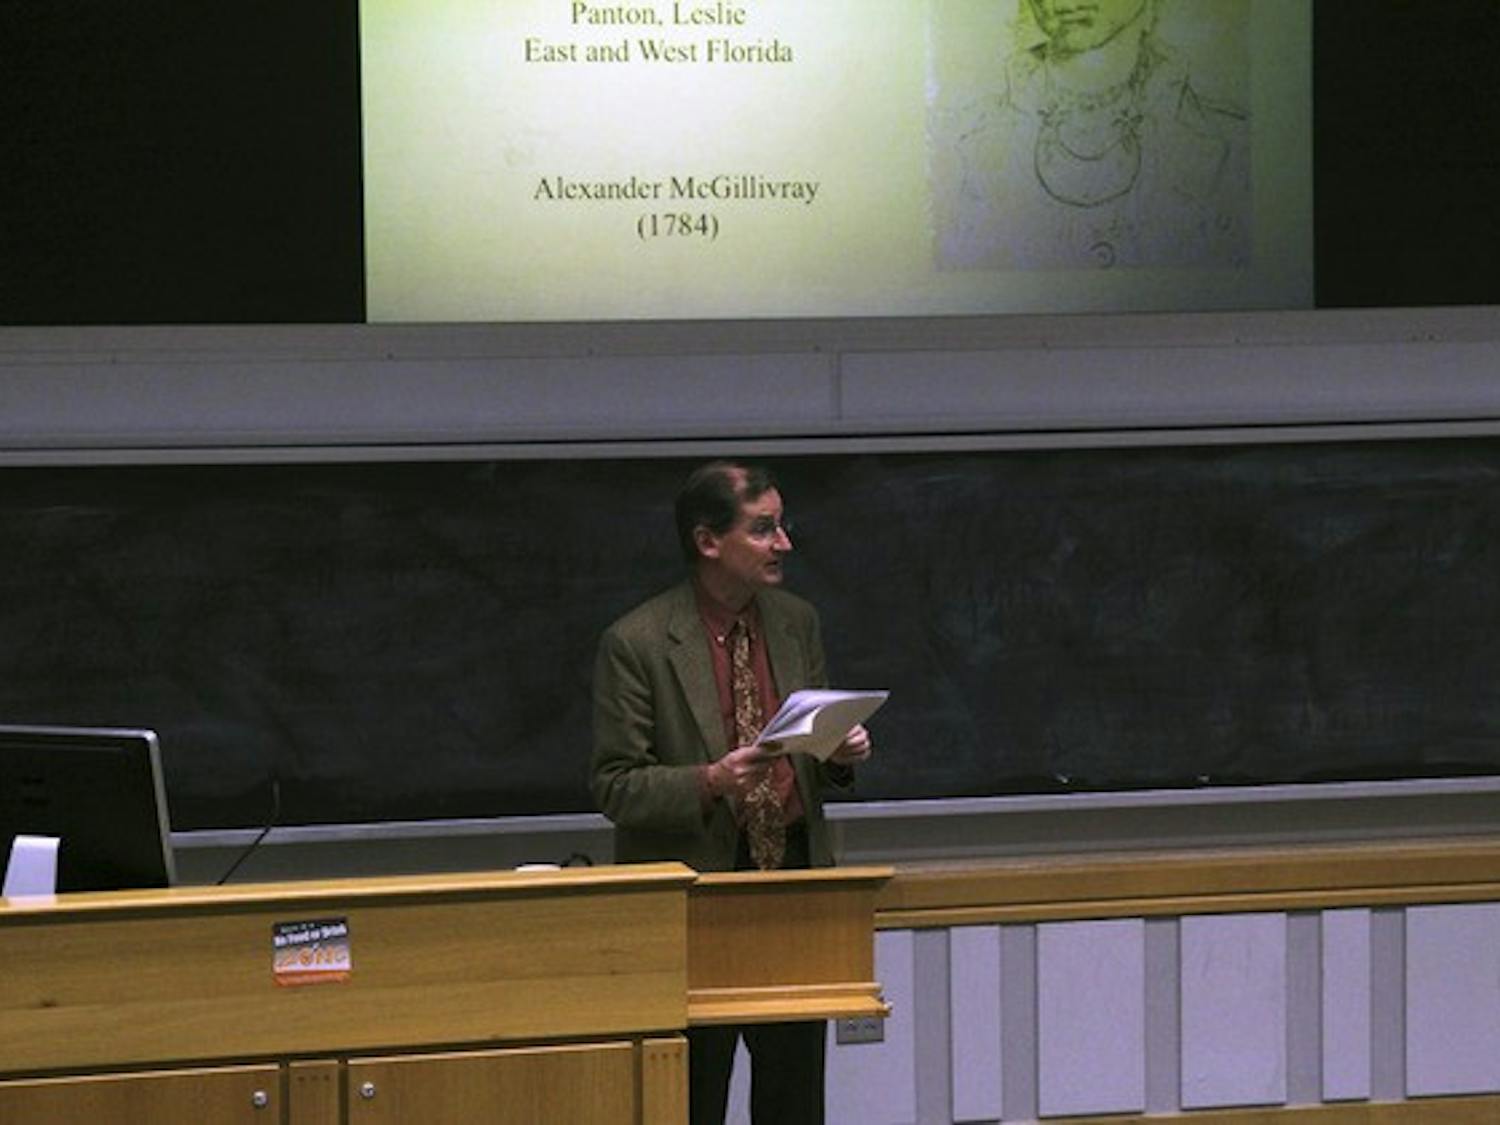 University of New Hampshire history professor Eliga Gould offered an alternative take on the American Revolution in a lecture Monday afternoon.